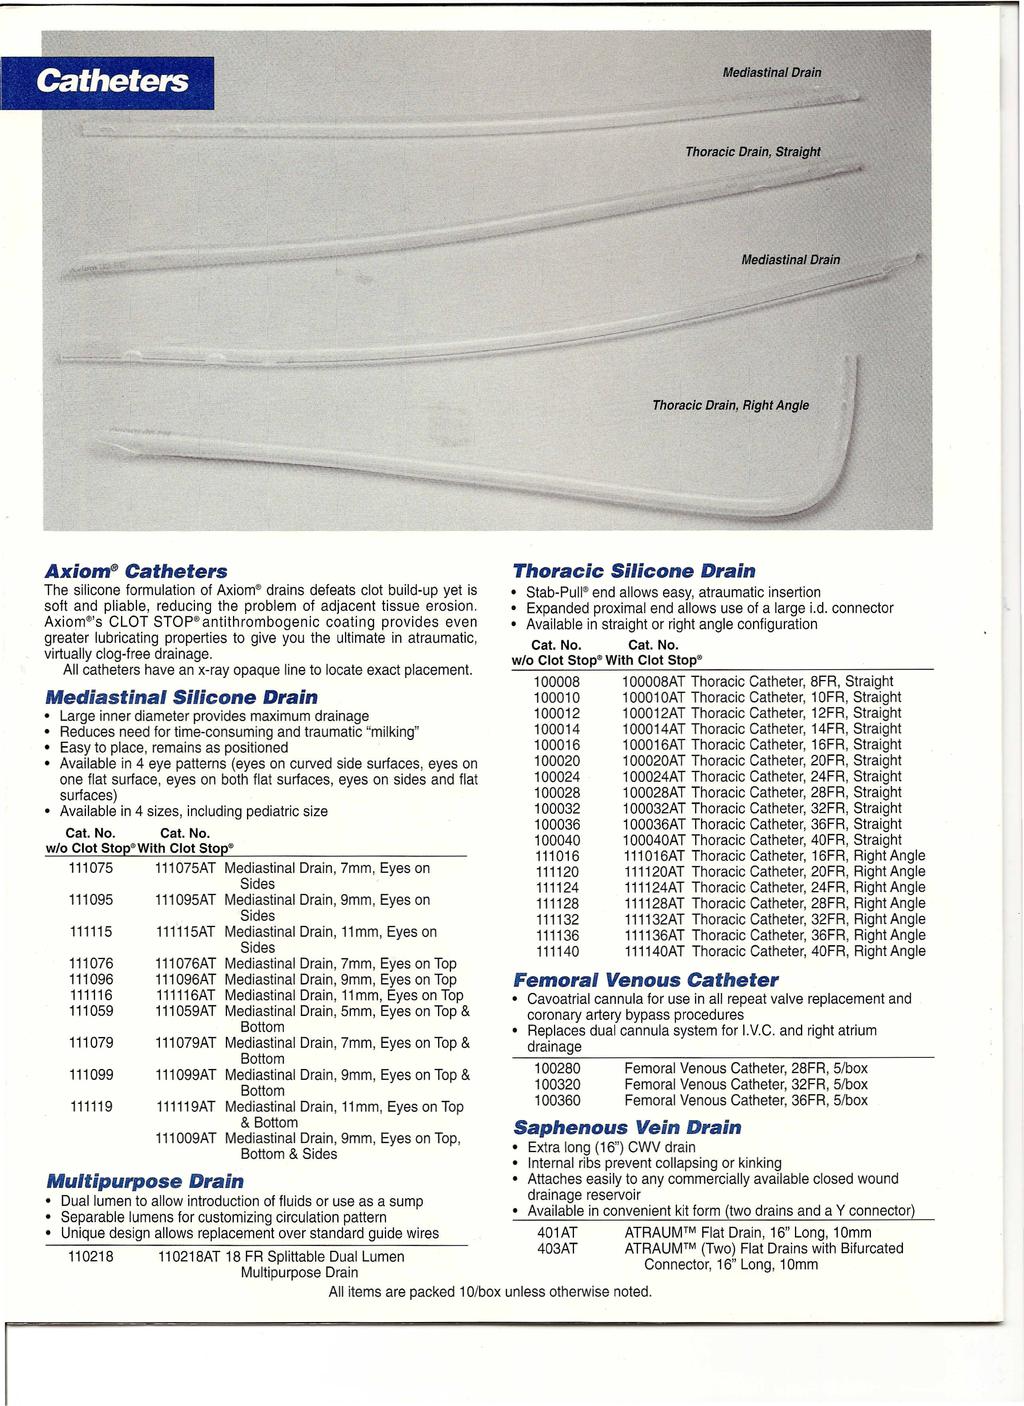 Catheters Axiom Catheters Silicone Drain The silicone formulation ofaxiom drains defeats clot build-up yet is soft and pliable, reducing the problem of adjacent tissue erosion, Axiom 's CLOT STOp